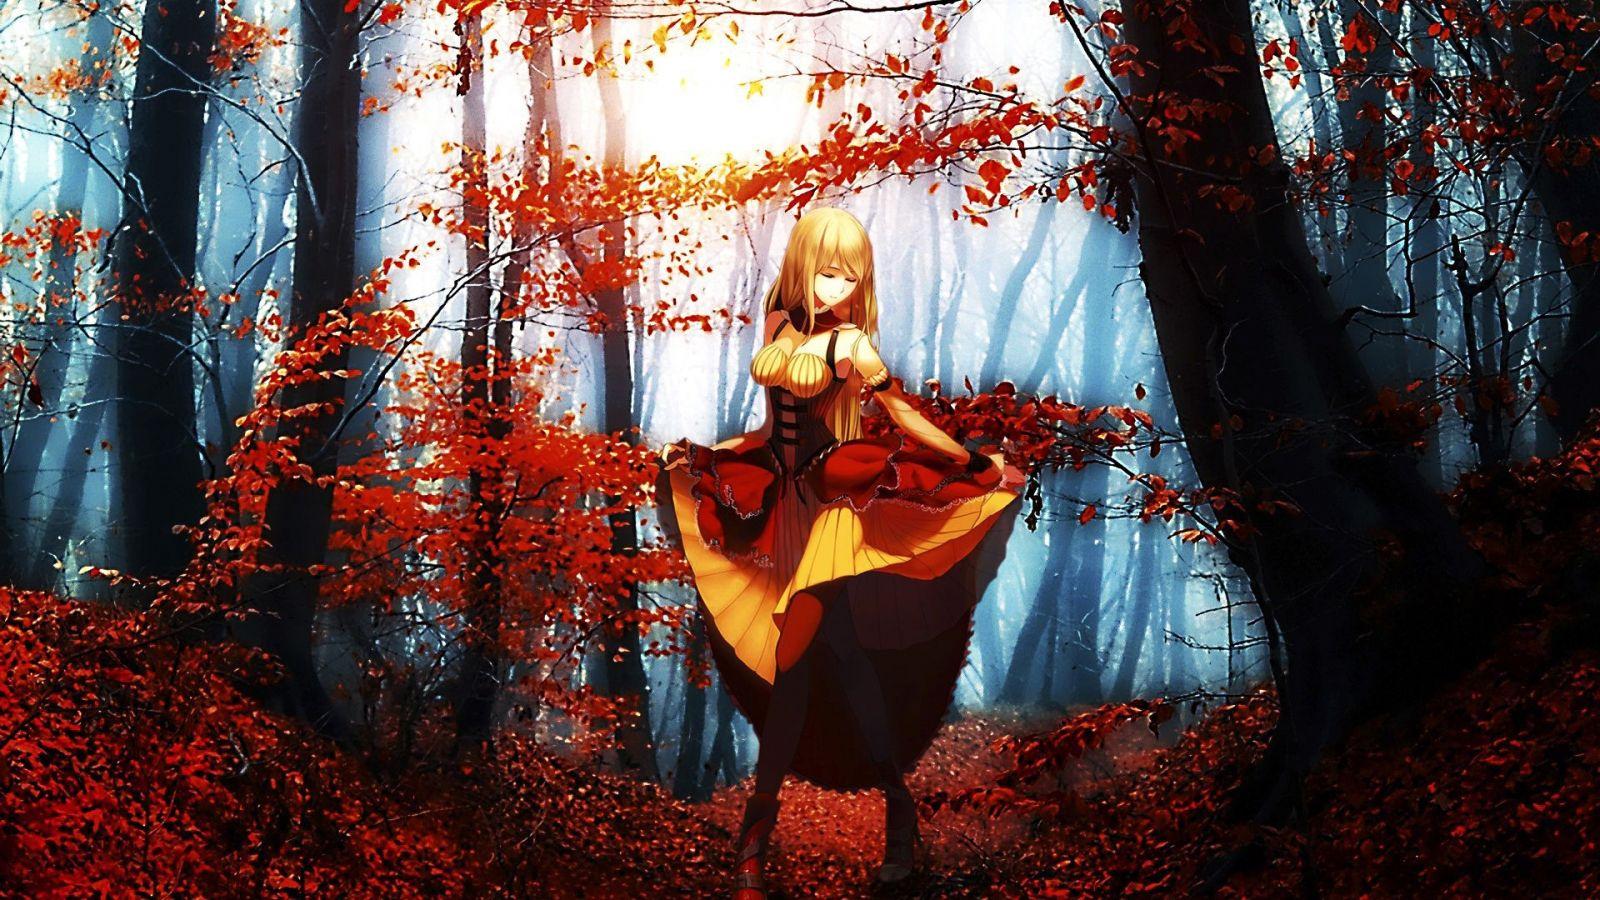 Autumn Anime Aesthetic Wallpapers - Wallpaper Cave